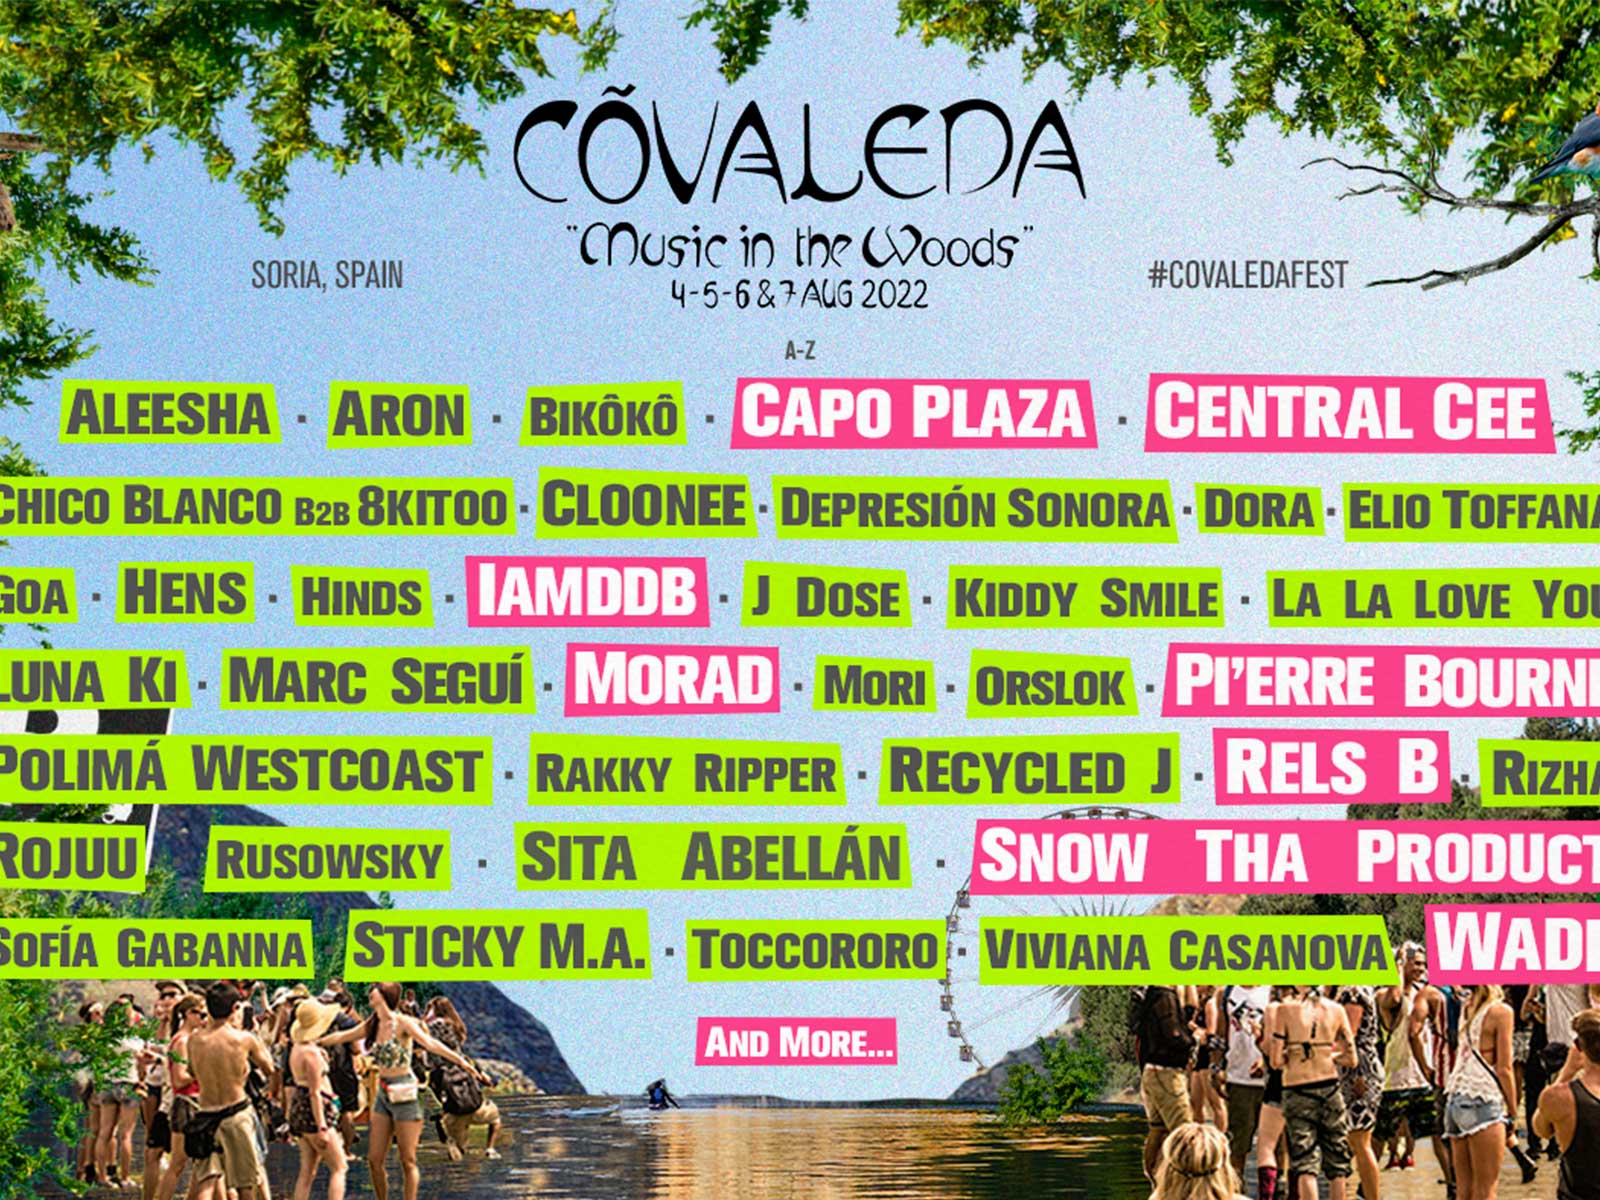 Road to the Woods: Warming up for the Covaleda Fest